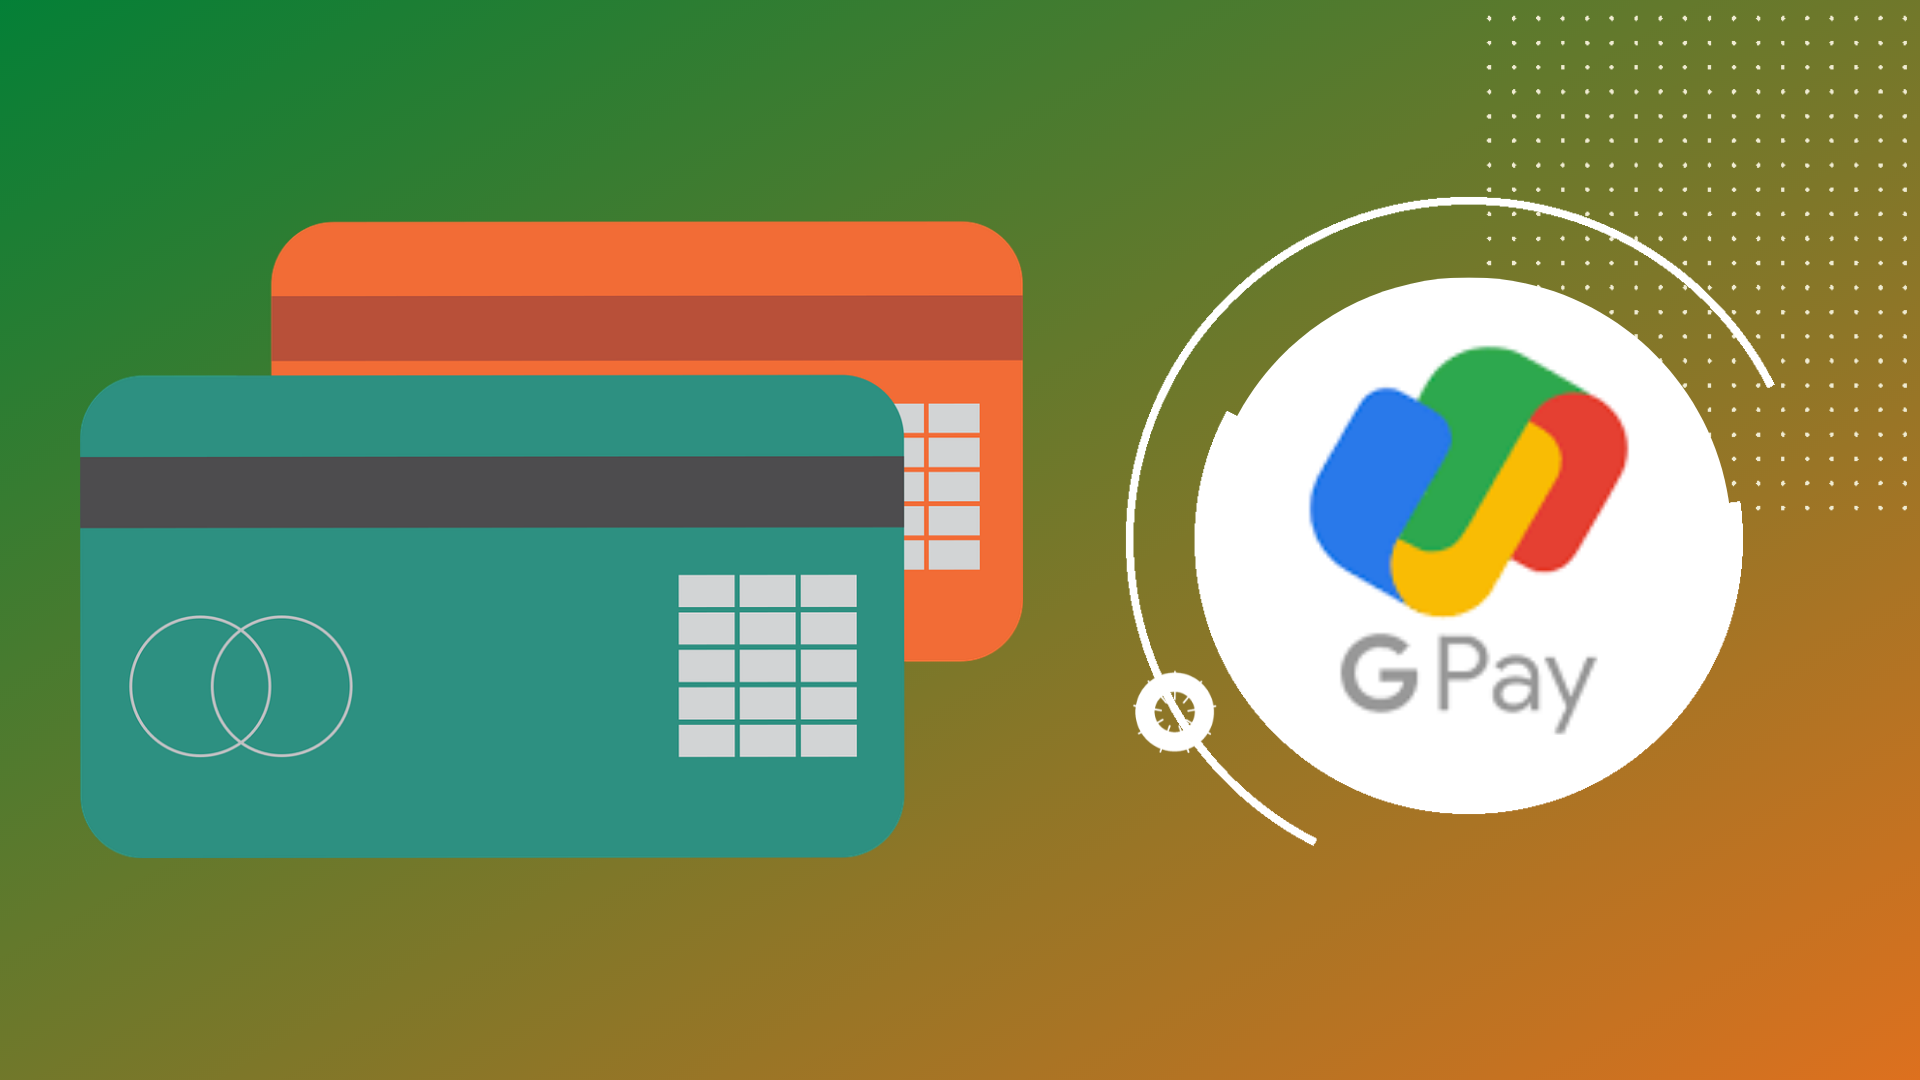 How to Add Credit Card in Google Pay?